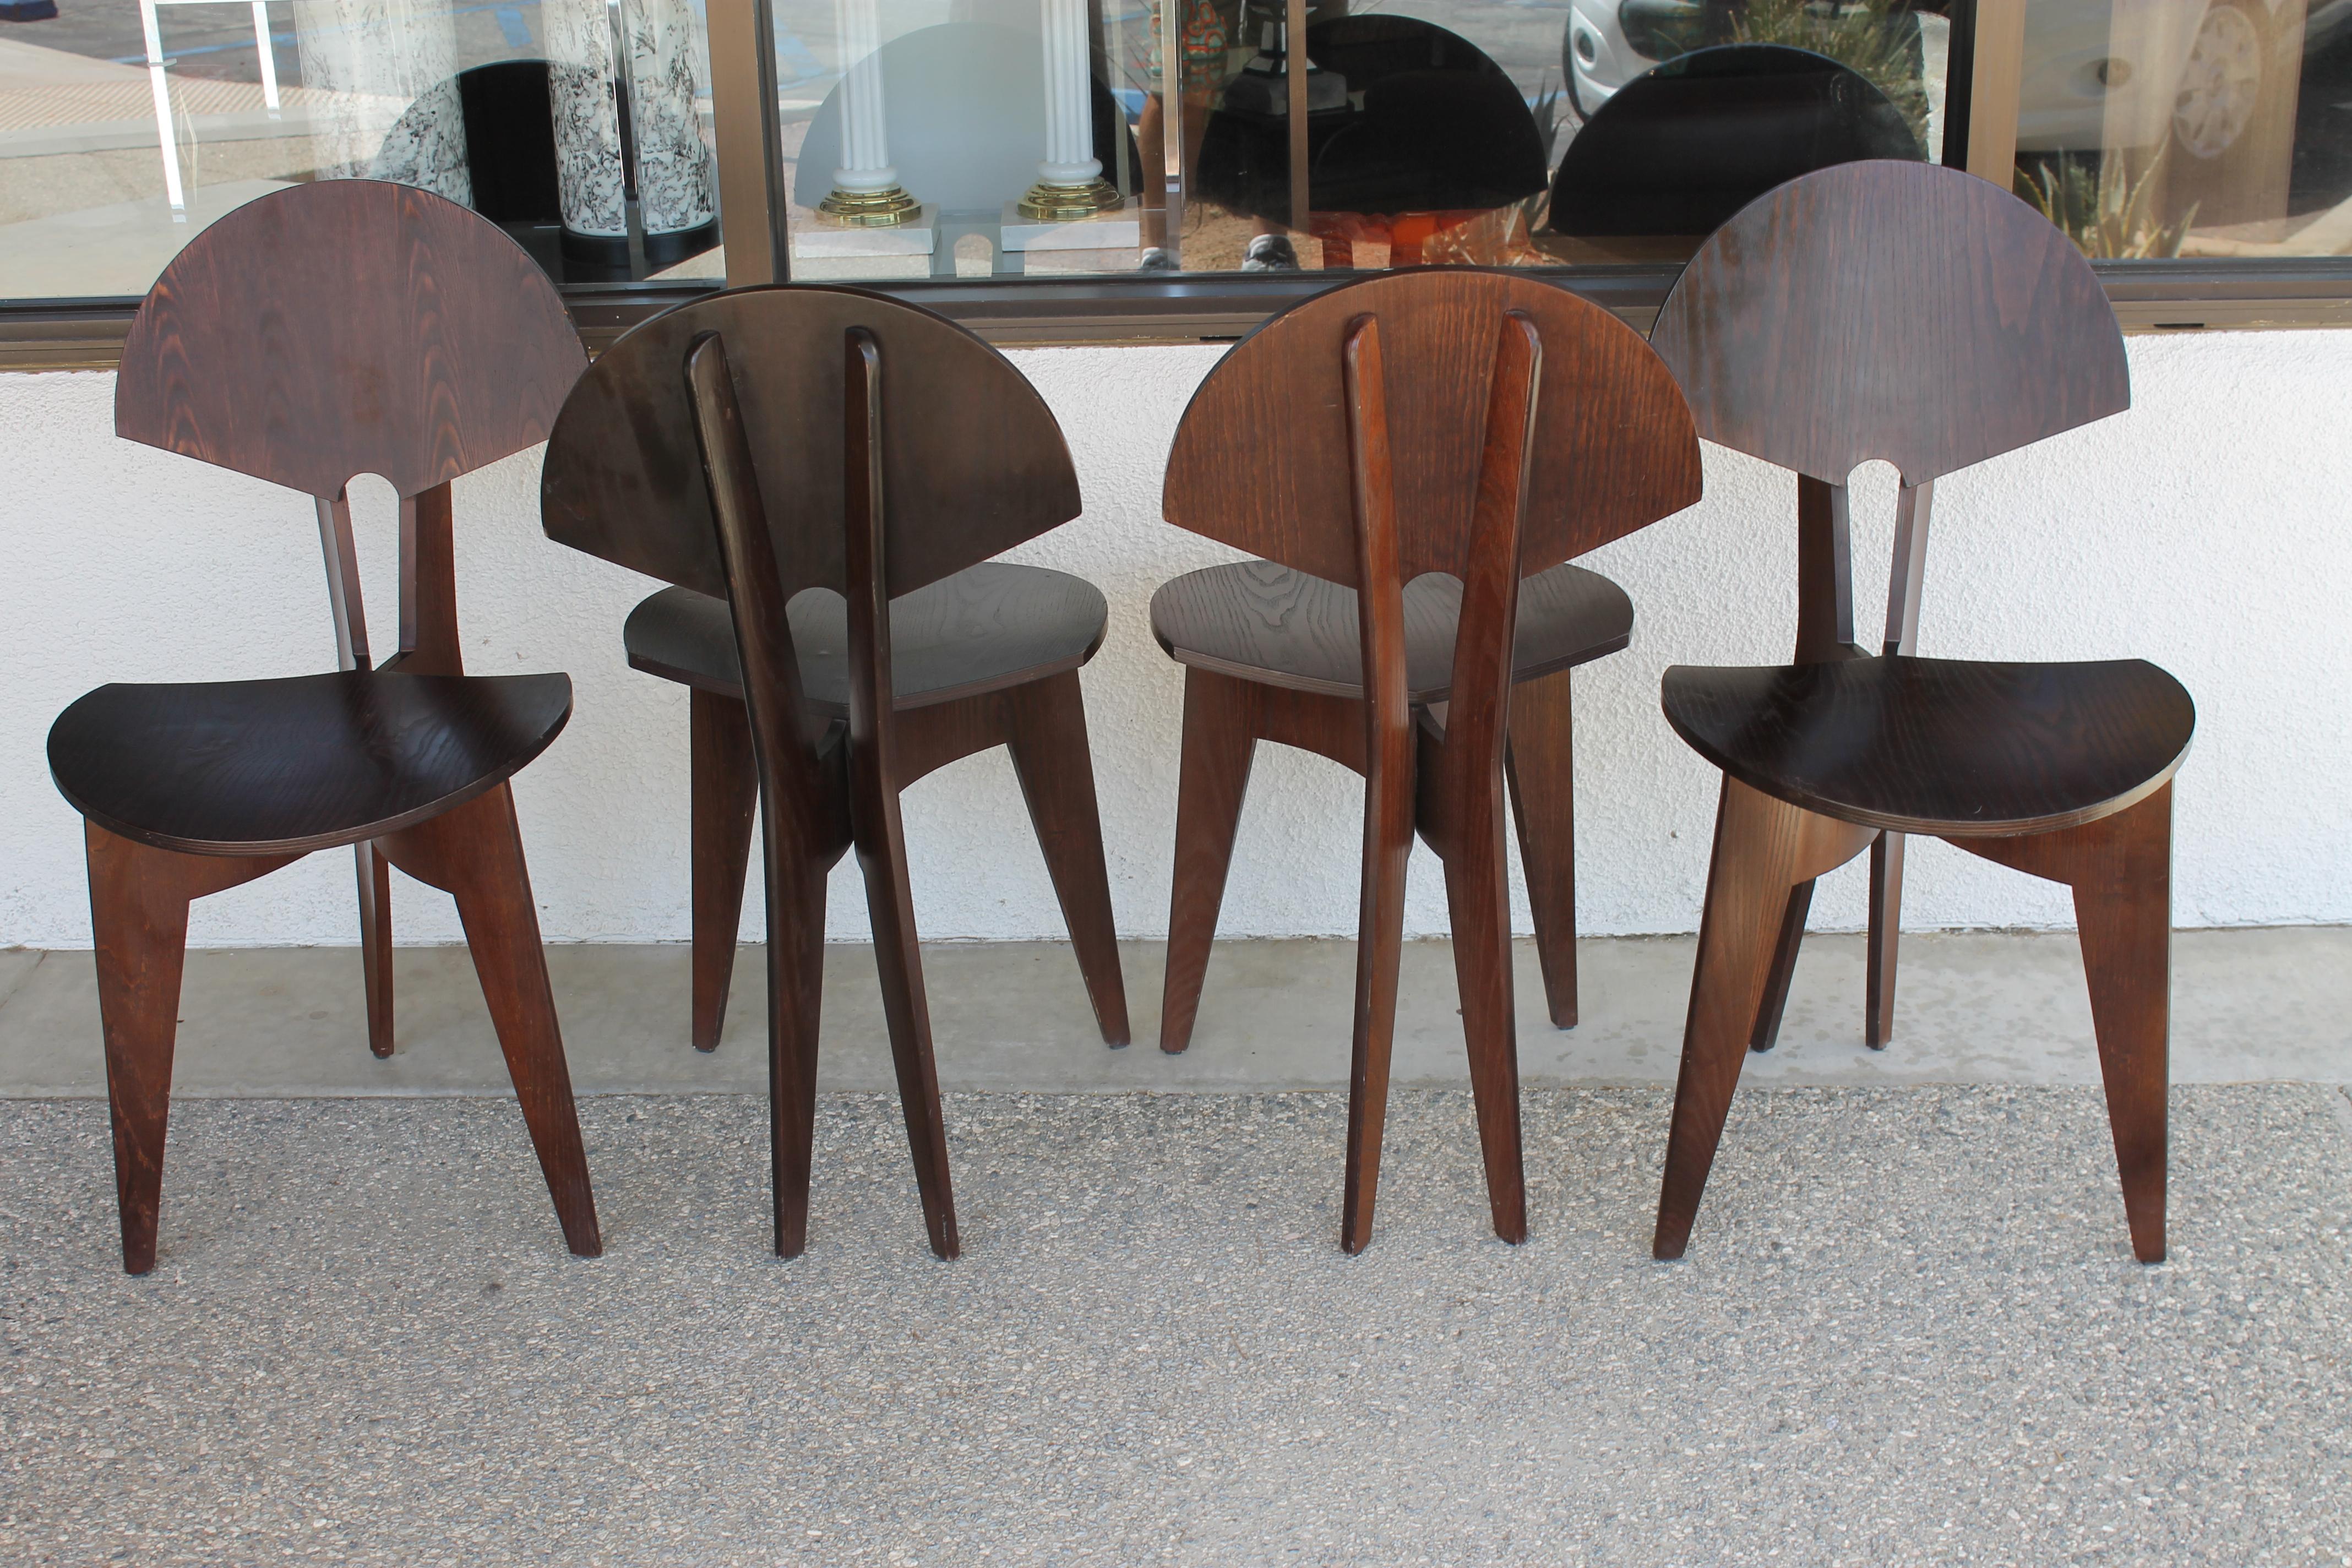 Four studio wood chairs in a ginkgo leaf or fan pattern. Each chair measures 16.5” wide, 20.5” deep and 33” high. Seat height is 17.5”. We believe the wood to be ash and they are extremely light weight.
 